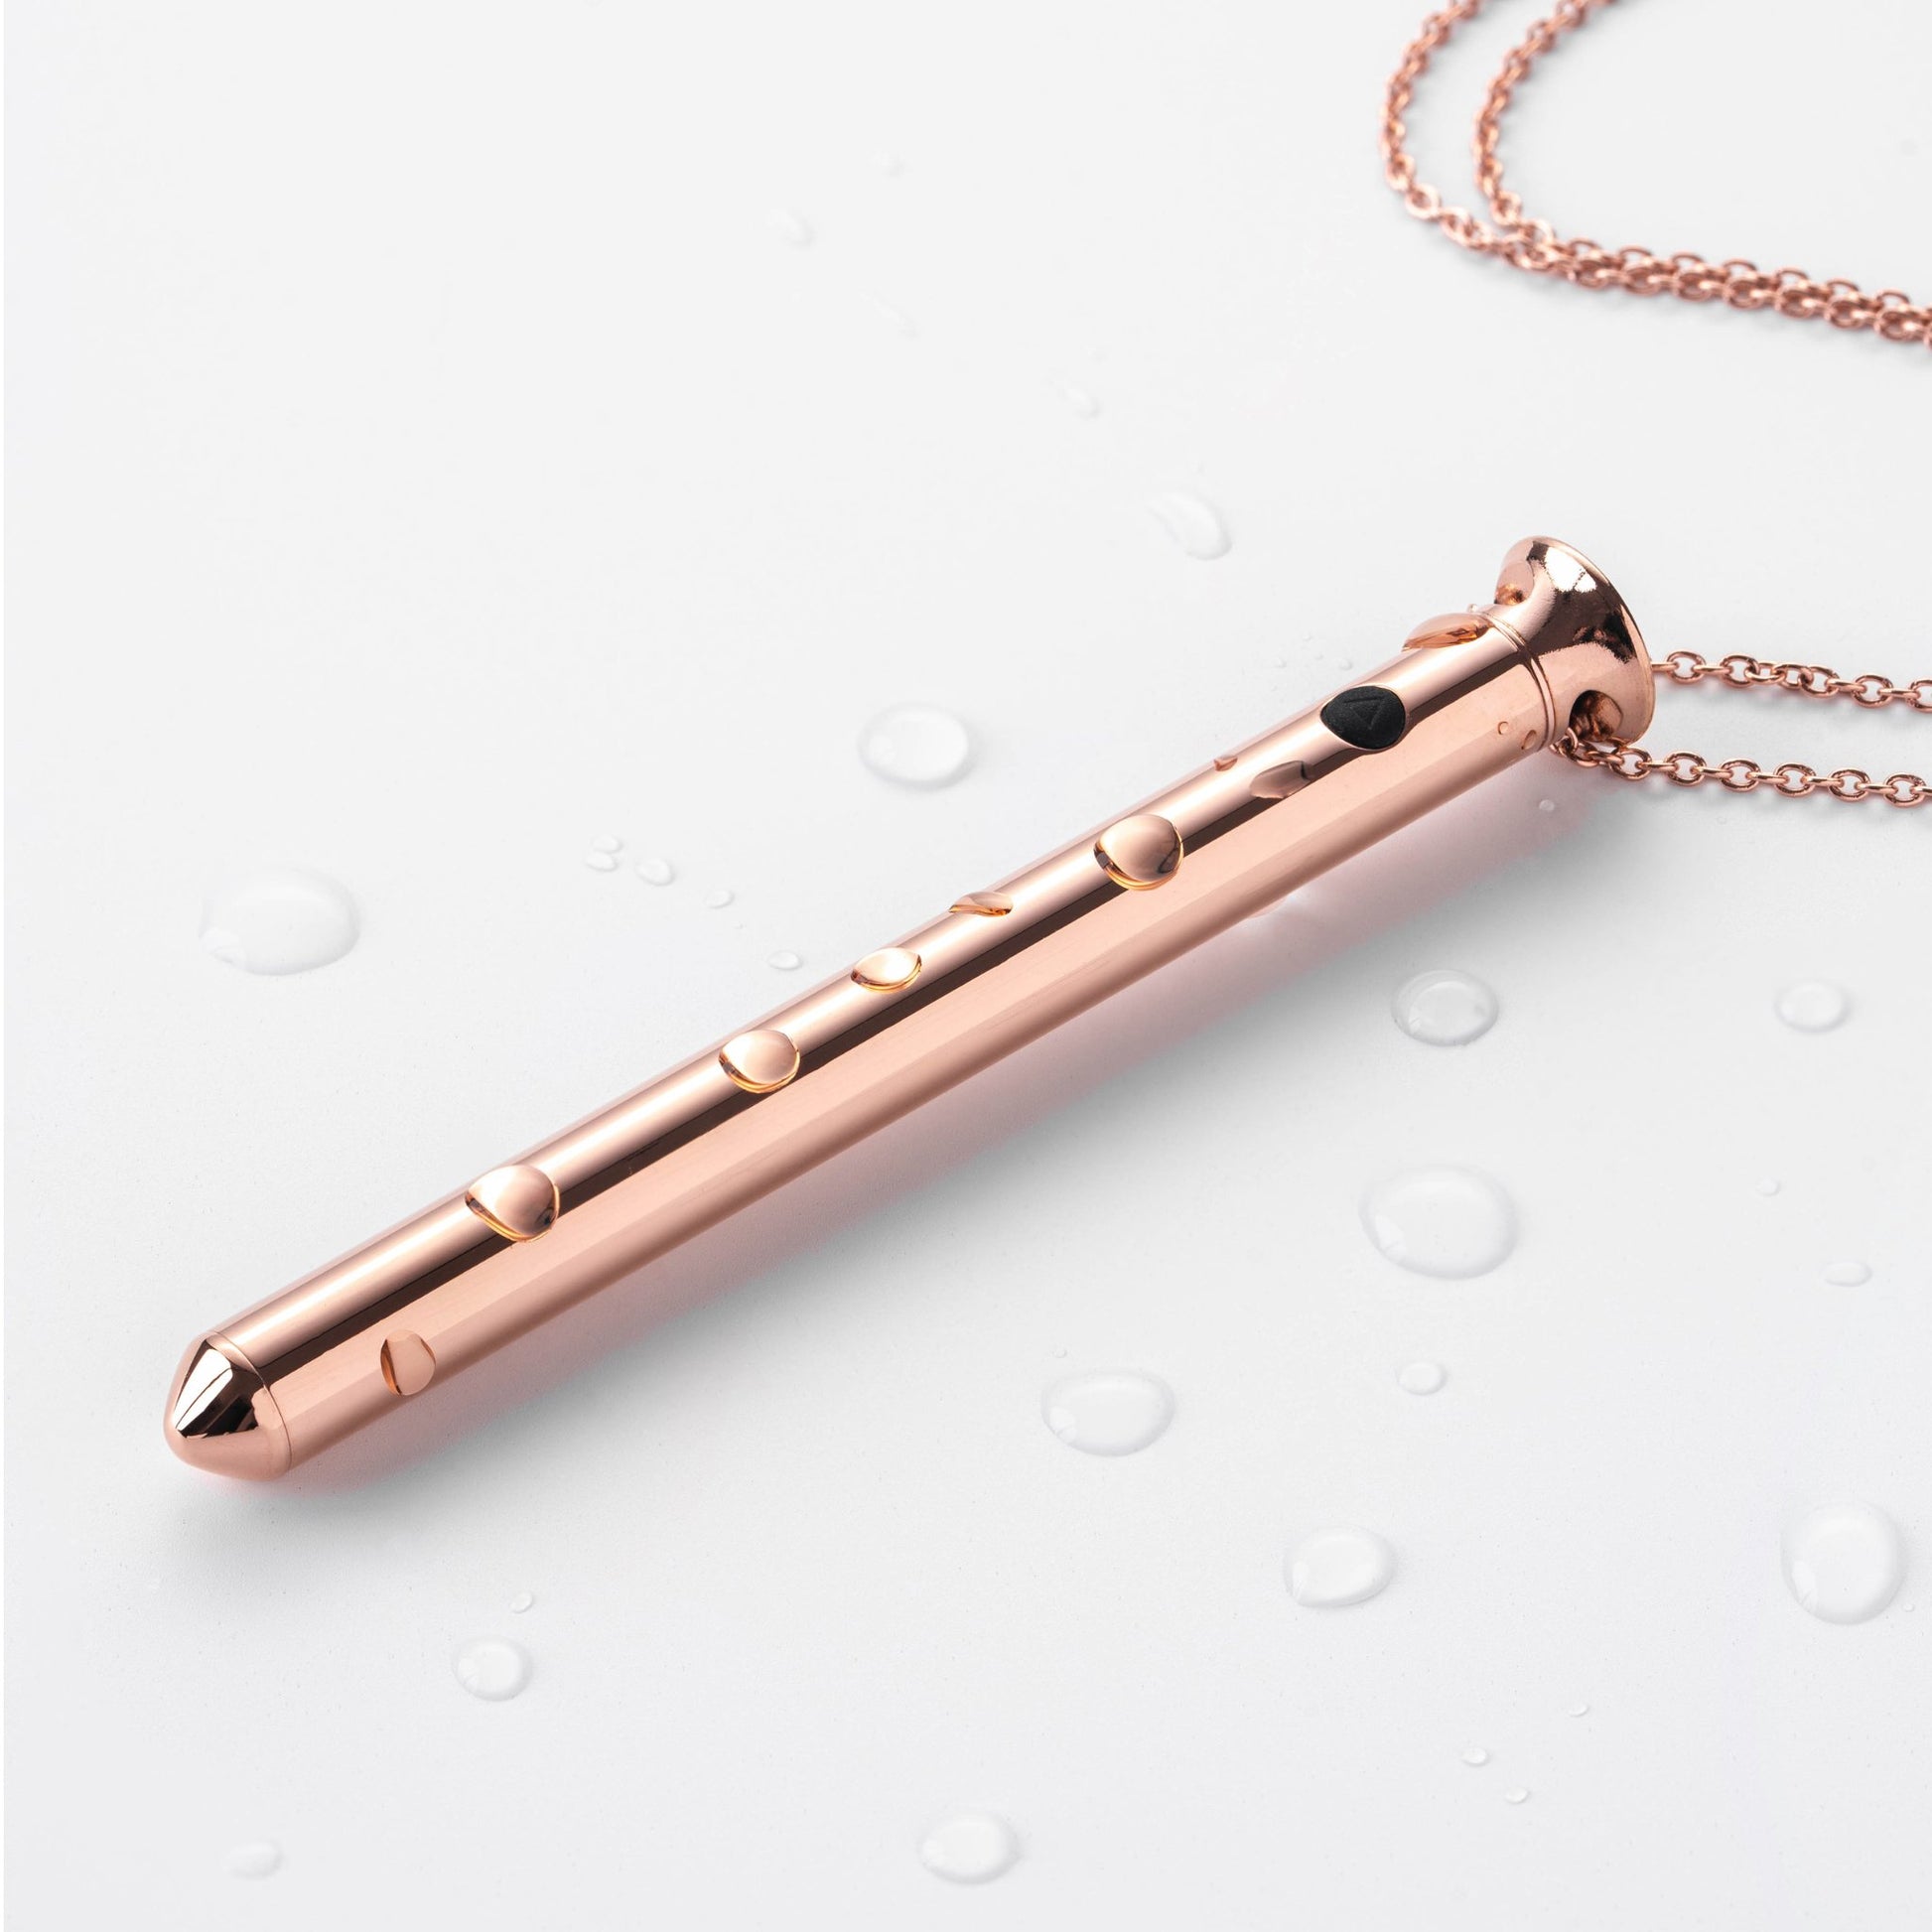 Vesper 2 in Rose Gold - Something about Sofia